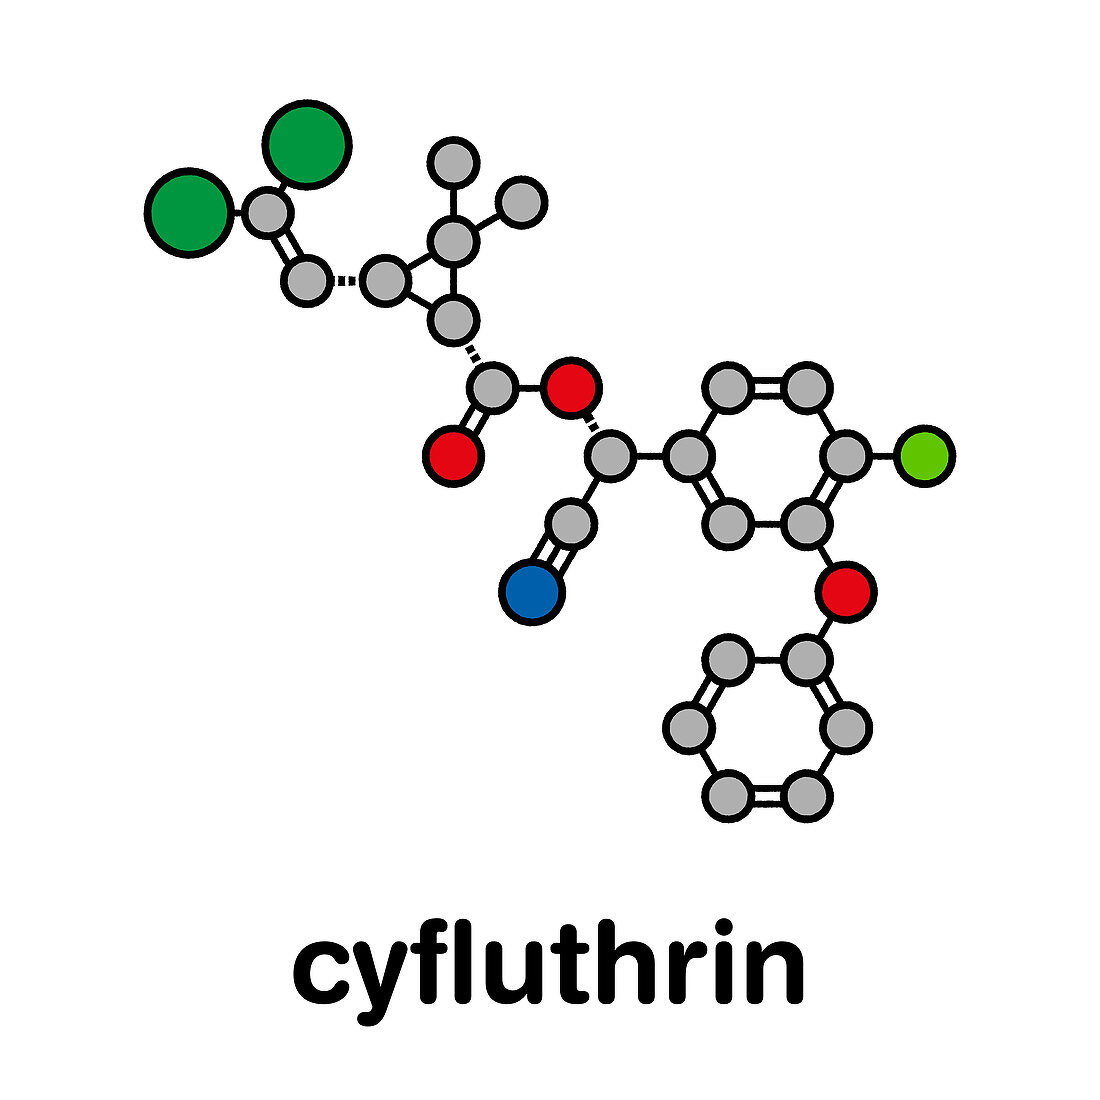 Cyfluthrin insecticide molecule, illustration